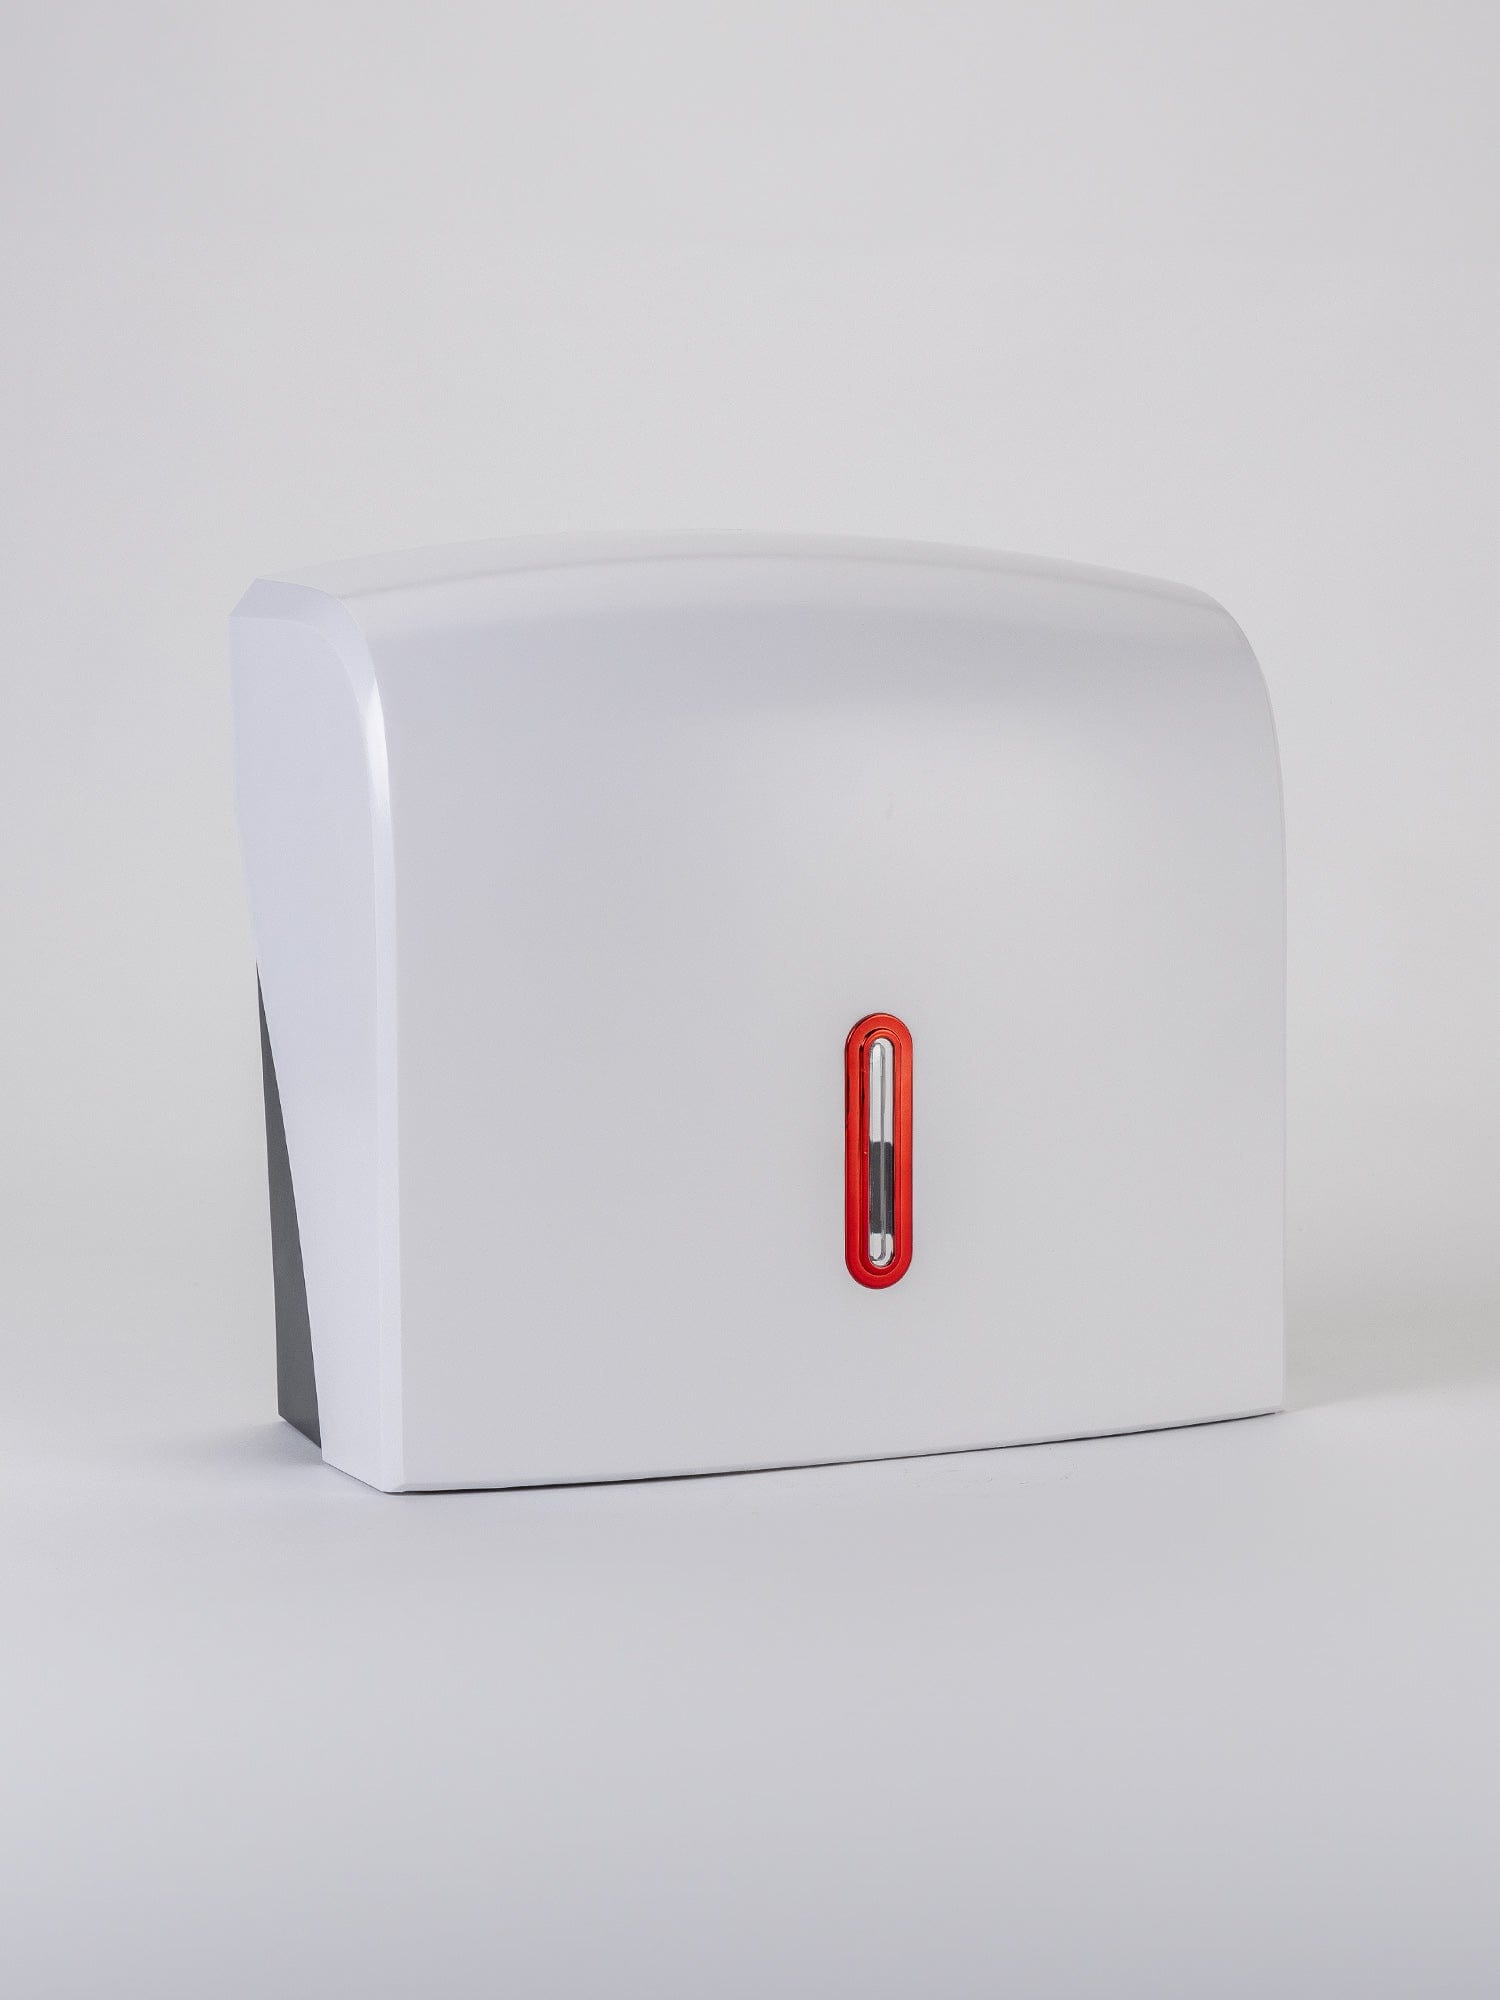 ruby halo small hand towel dispensers